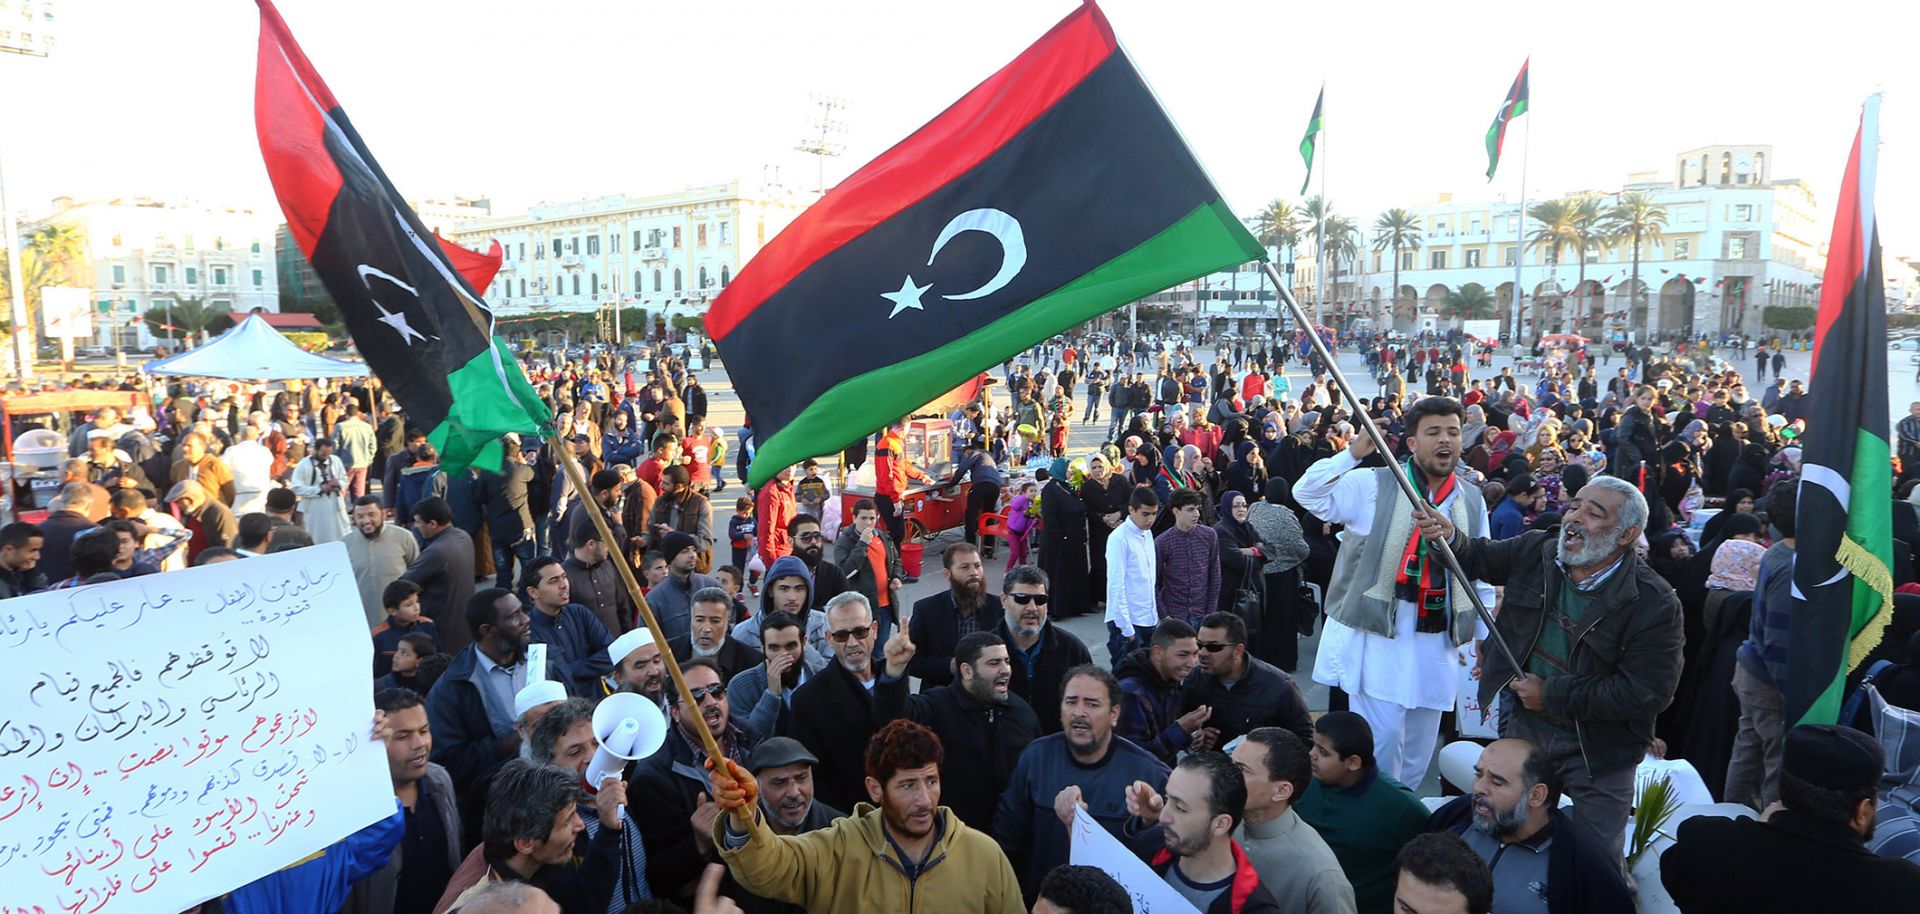 The fractures in Libya's convoluted network of alignments grow deeper as outside powers mediate.